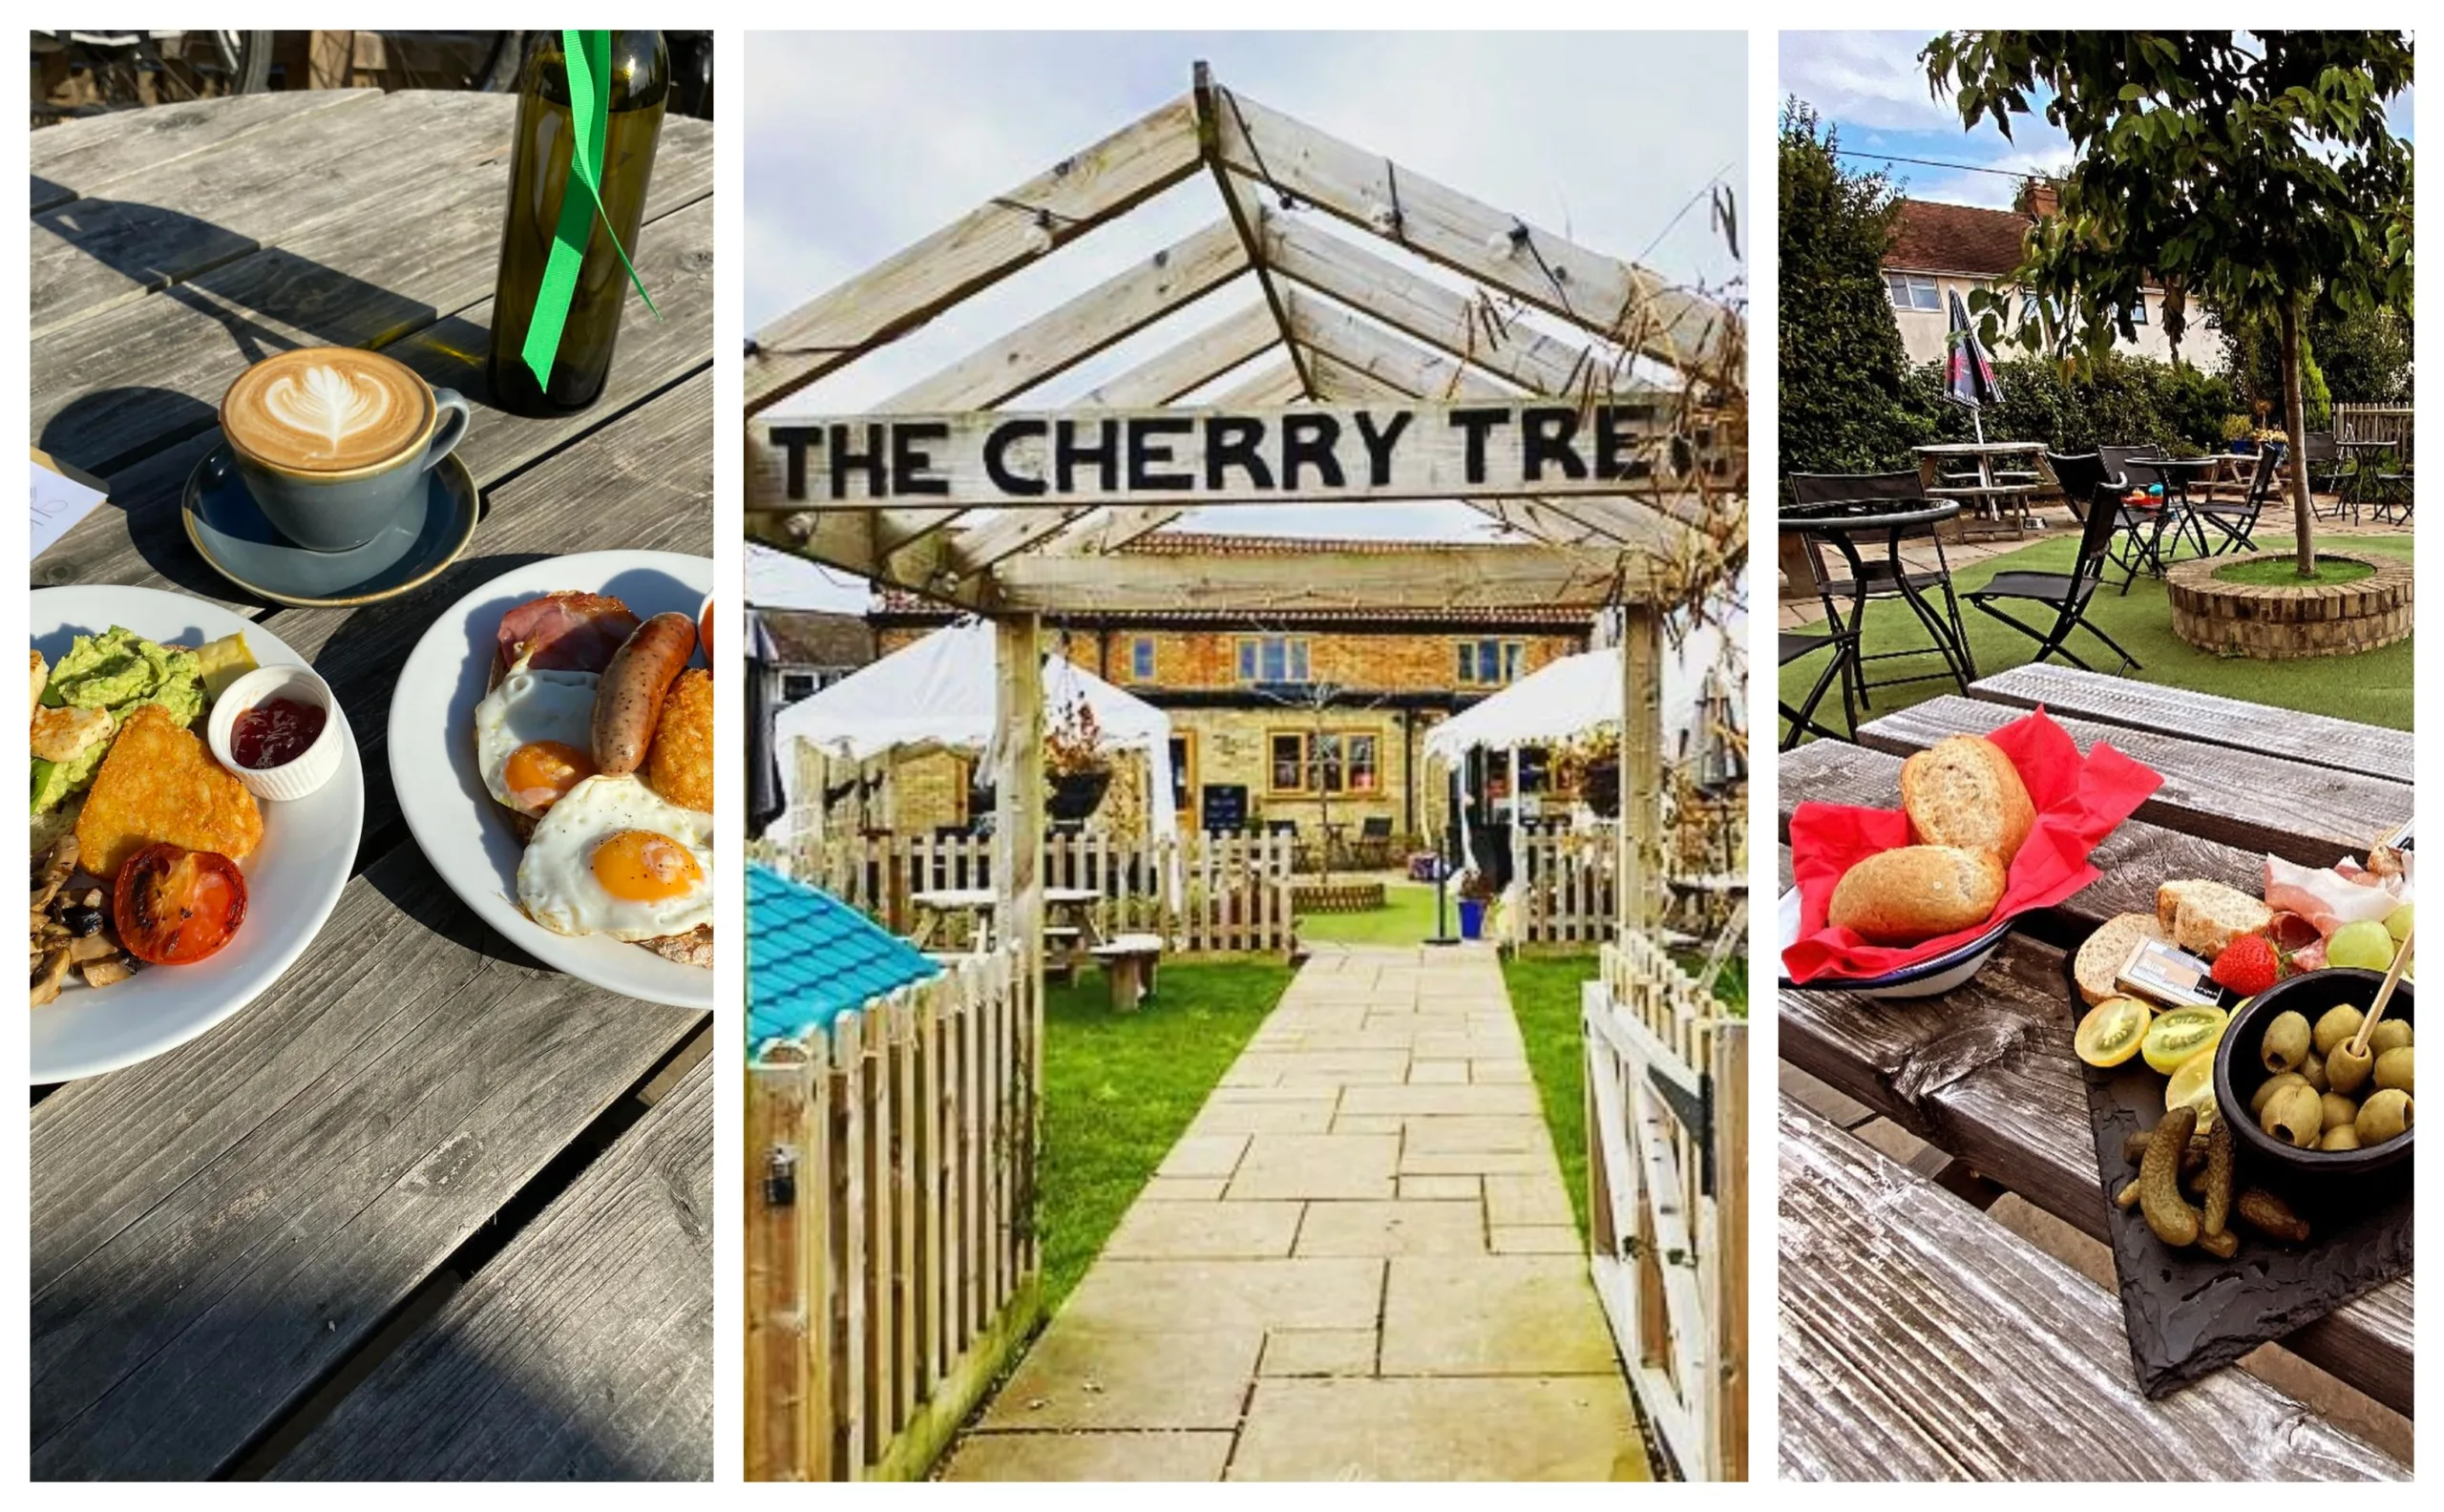 Headed ‘permanent closure of the Haddenham Cherry Tree’ the owners have explained on Facebook to its customers and friends their momentous decision.